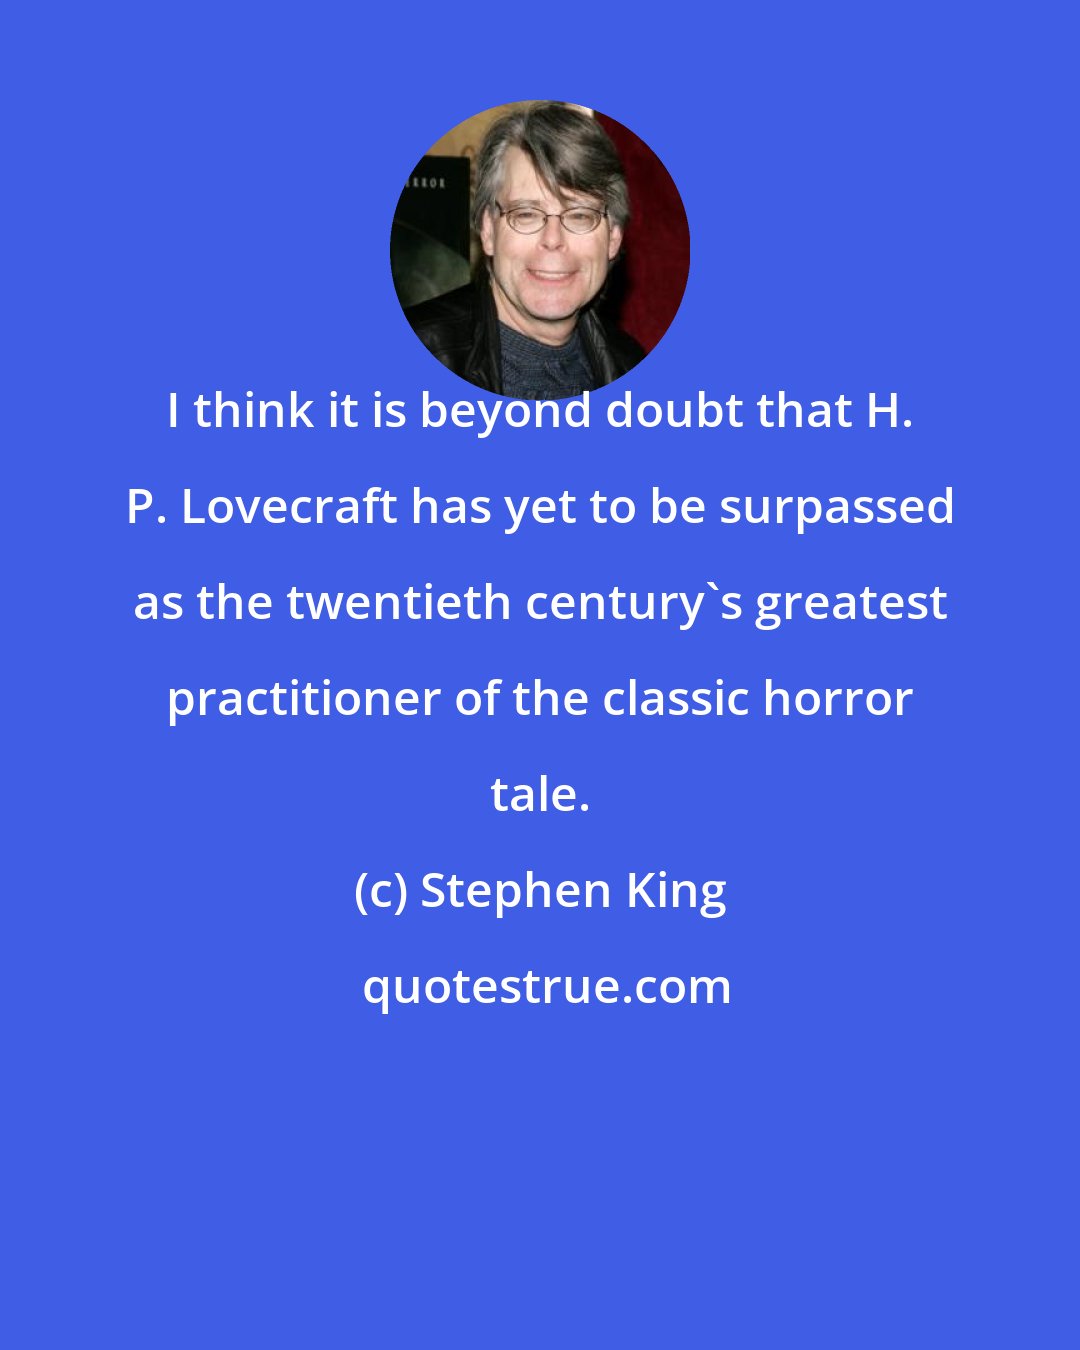 Stephen King: I think it is beyond doubt that H. P. Lovecraft has yet to be surpassed as the twentieth century's greatest practitioner of the classic horror tale.